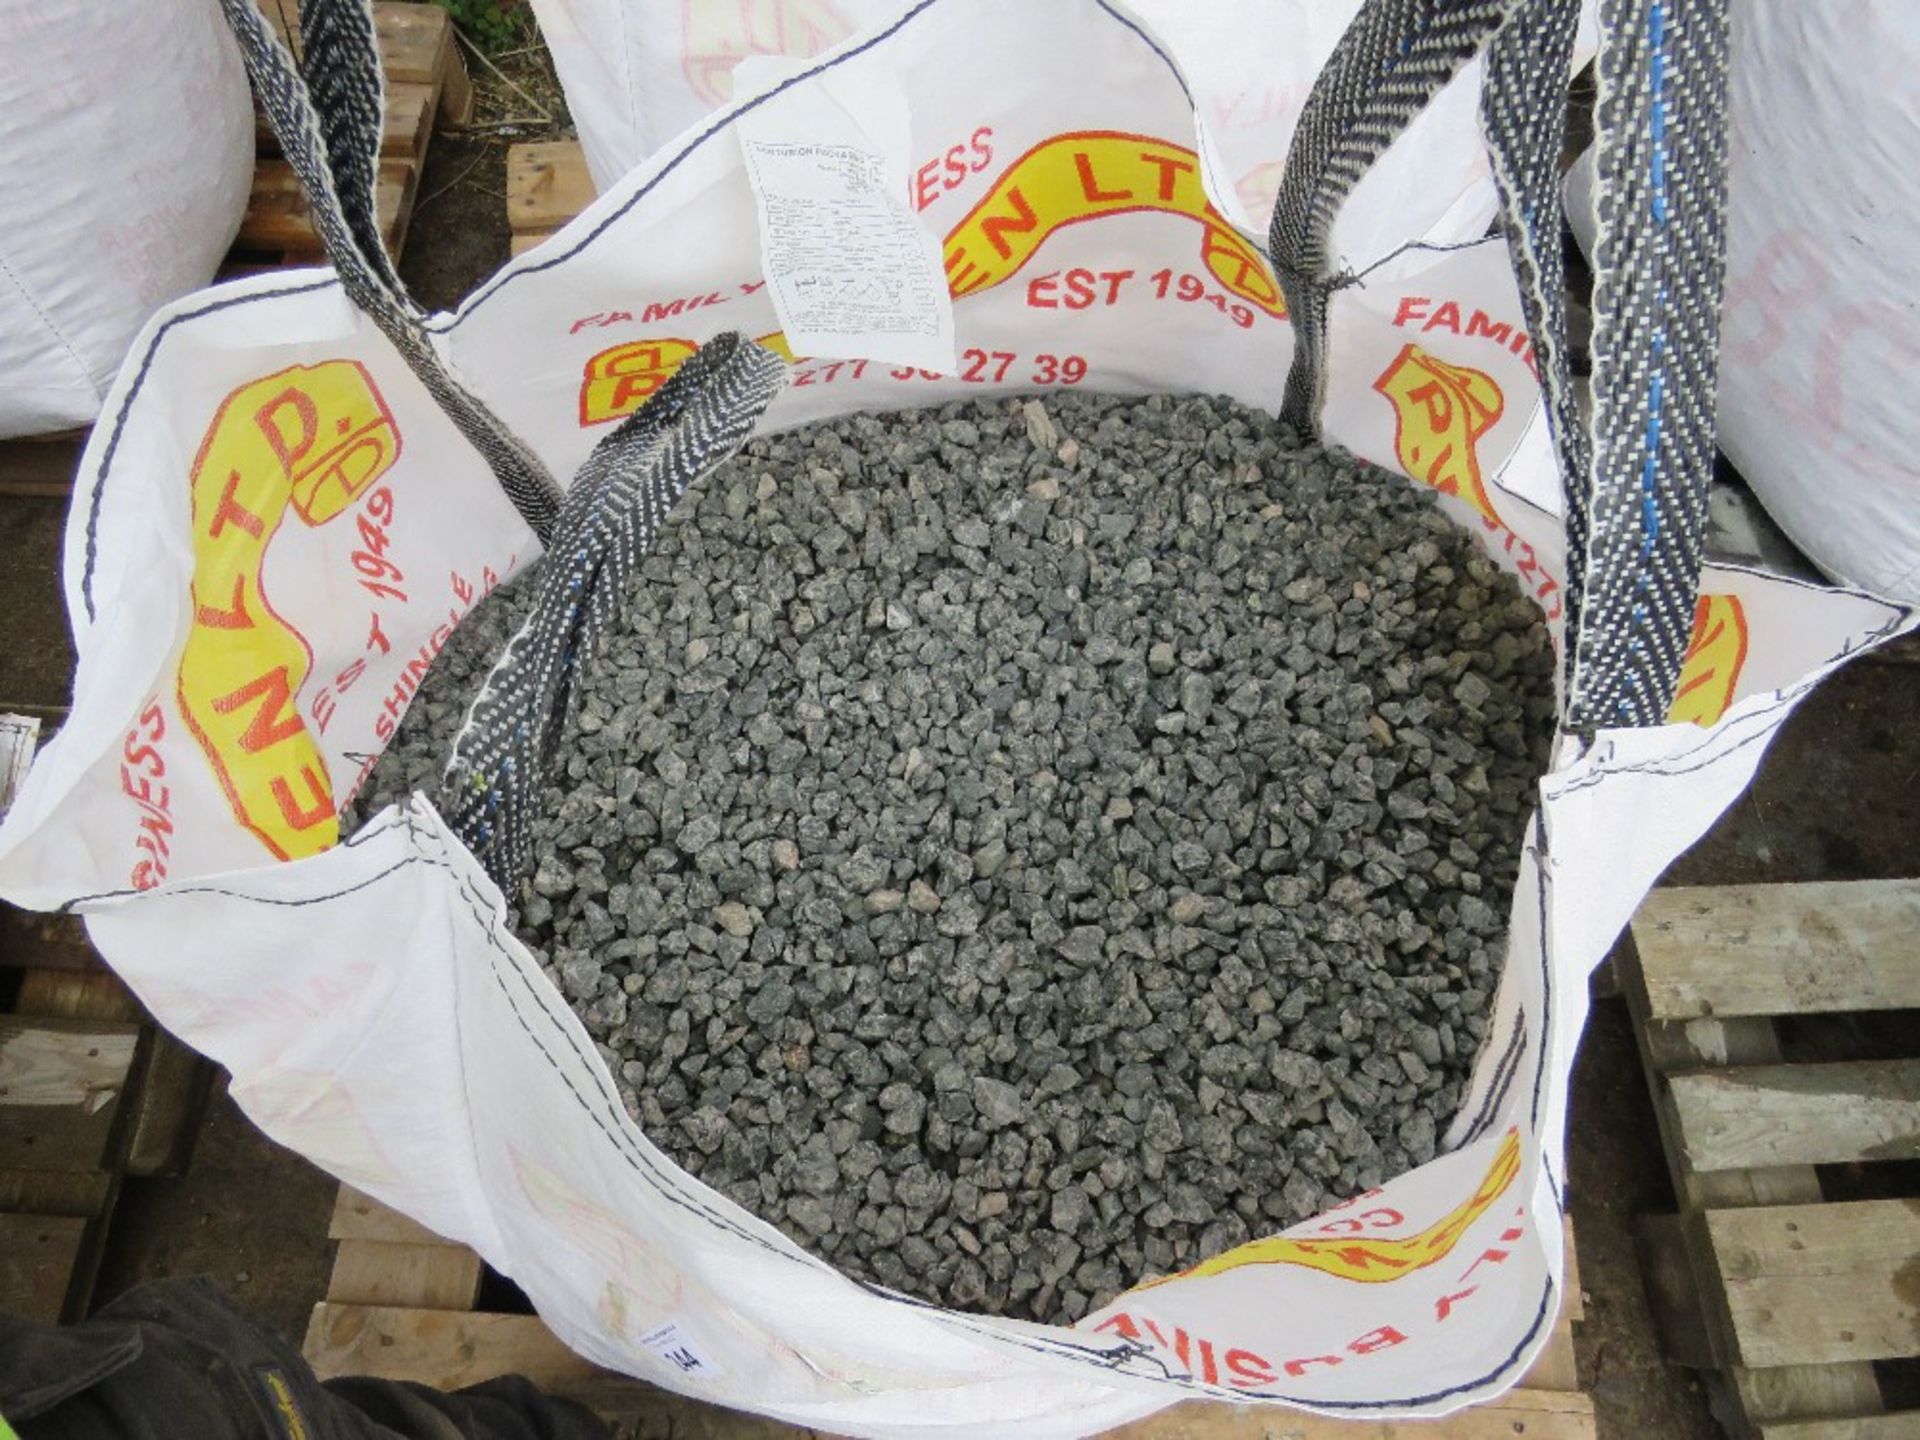 BULK BAG OF DECORATIVE GRANITE CHIPPINGS, "PINK FLECKED", 20MM SIZE APPROX. CANCELLED ORDER. THIS L